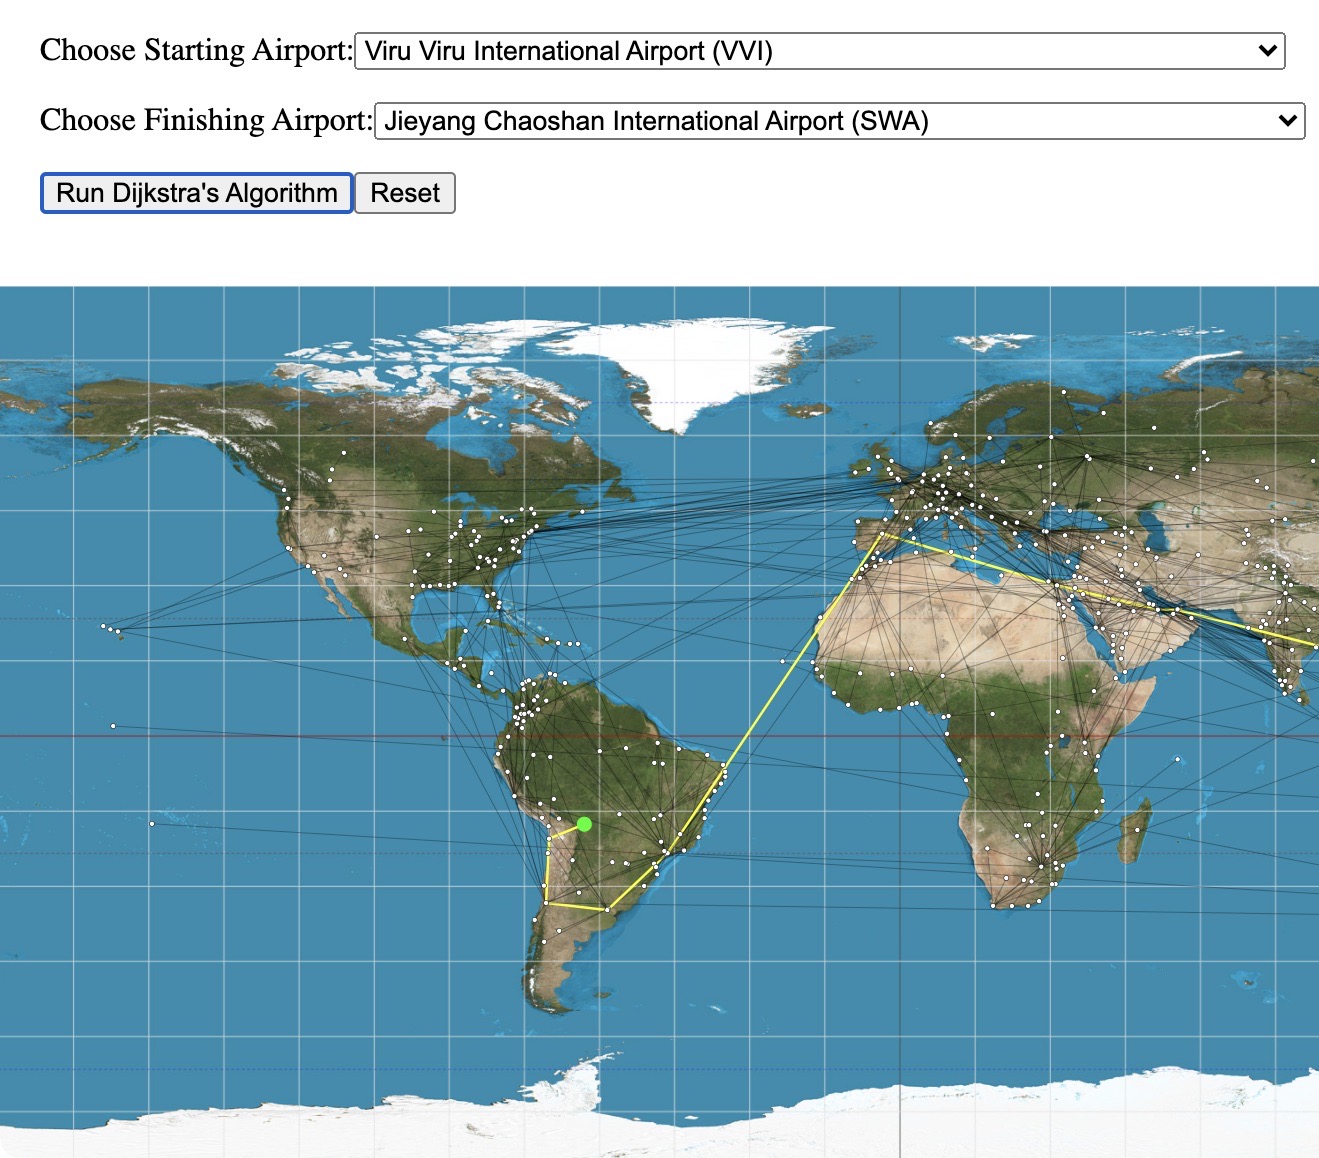 AirRoutes: A dynamic airline route application